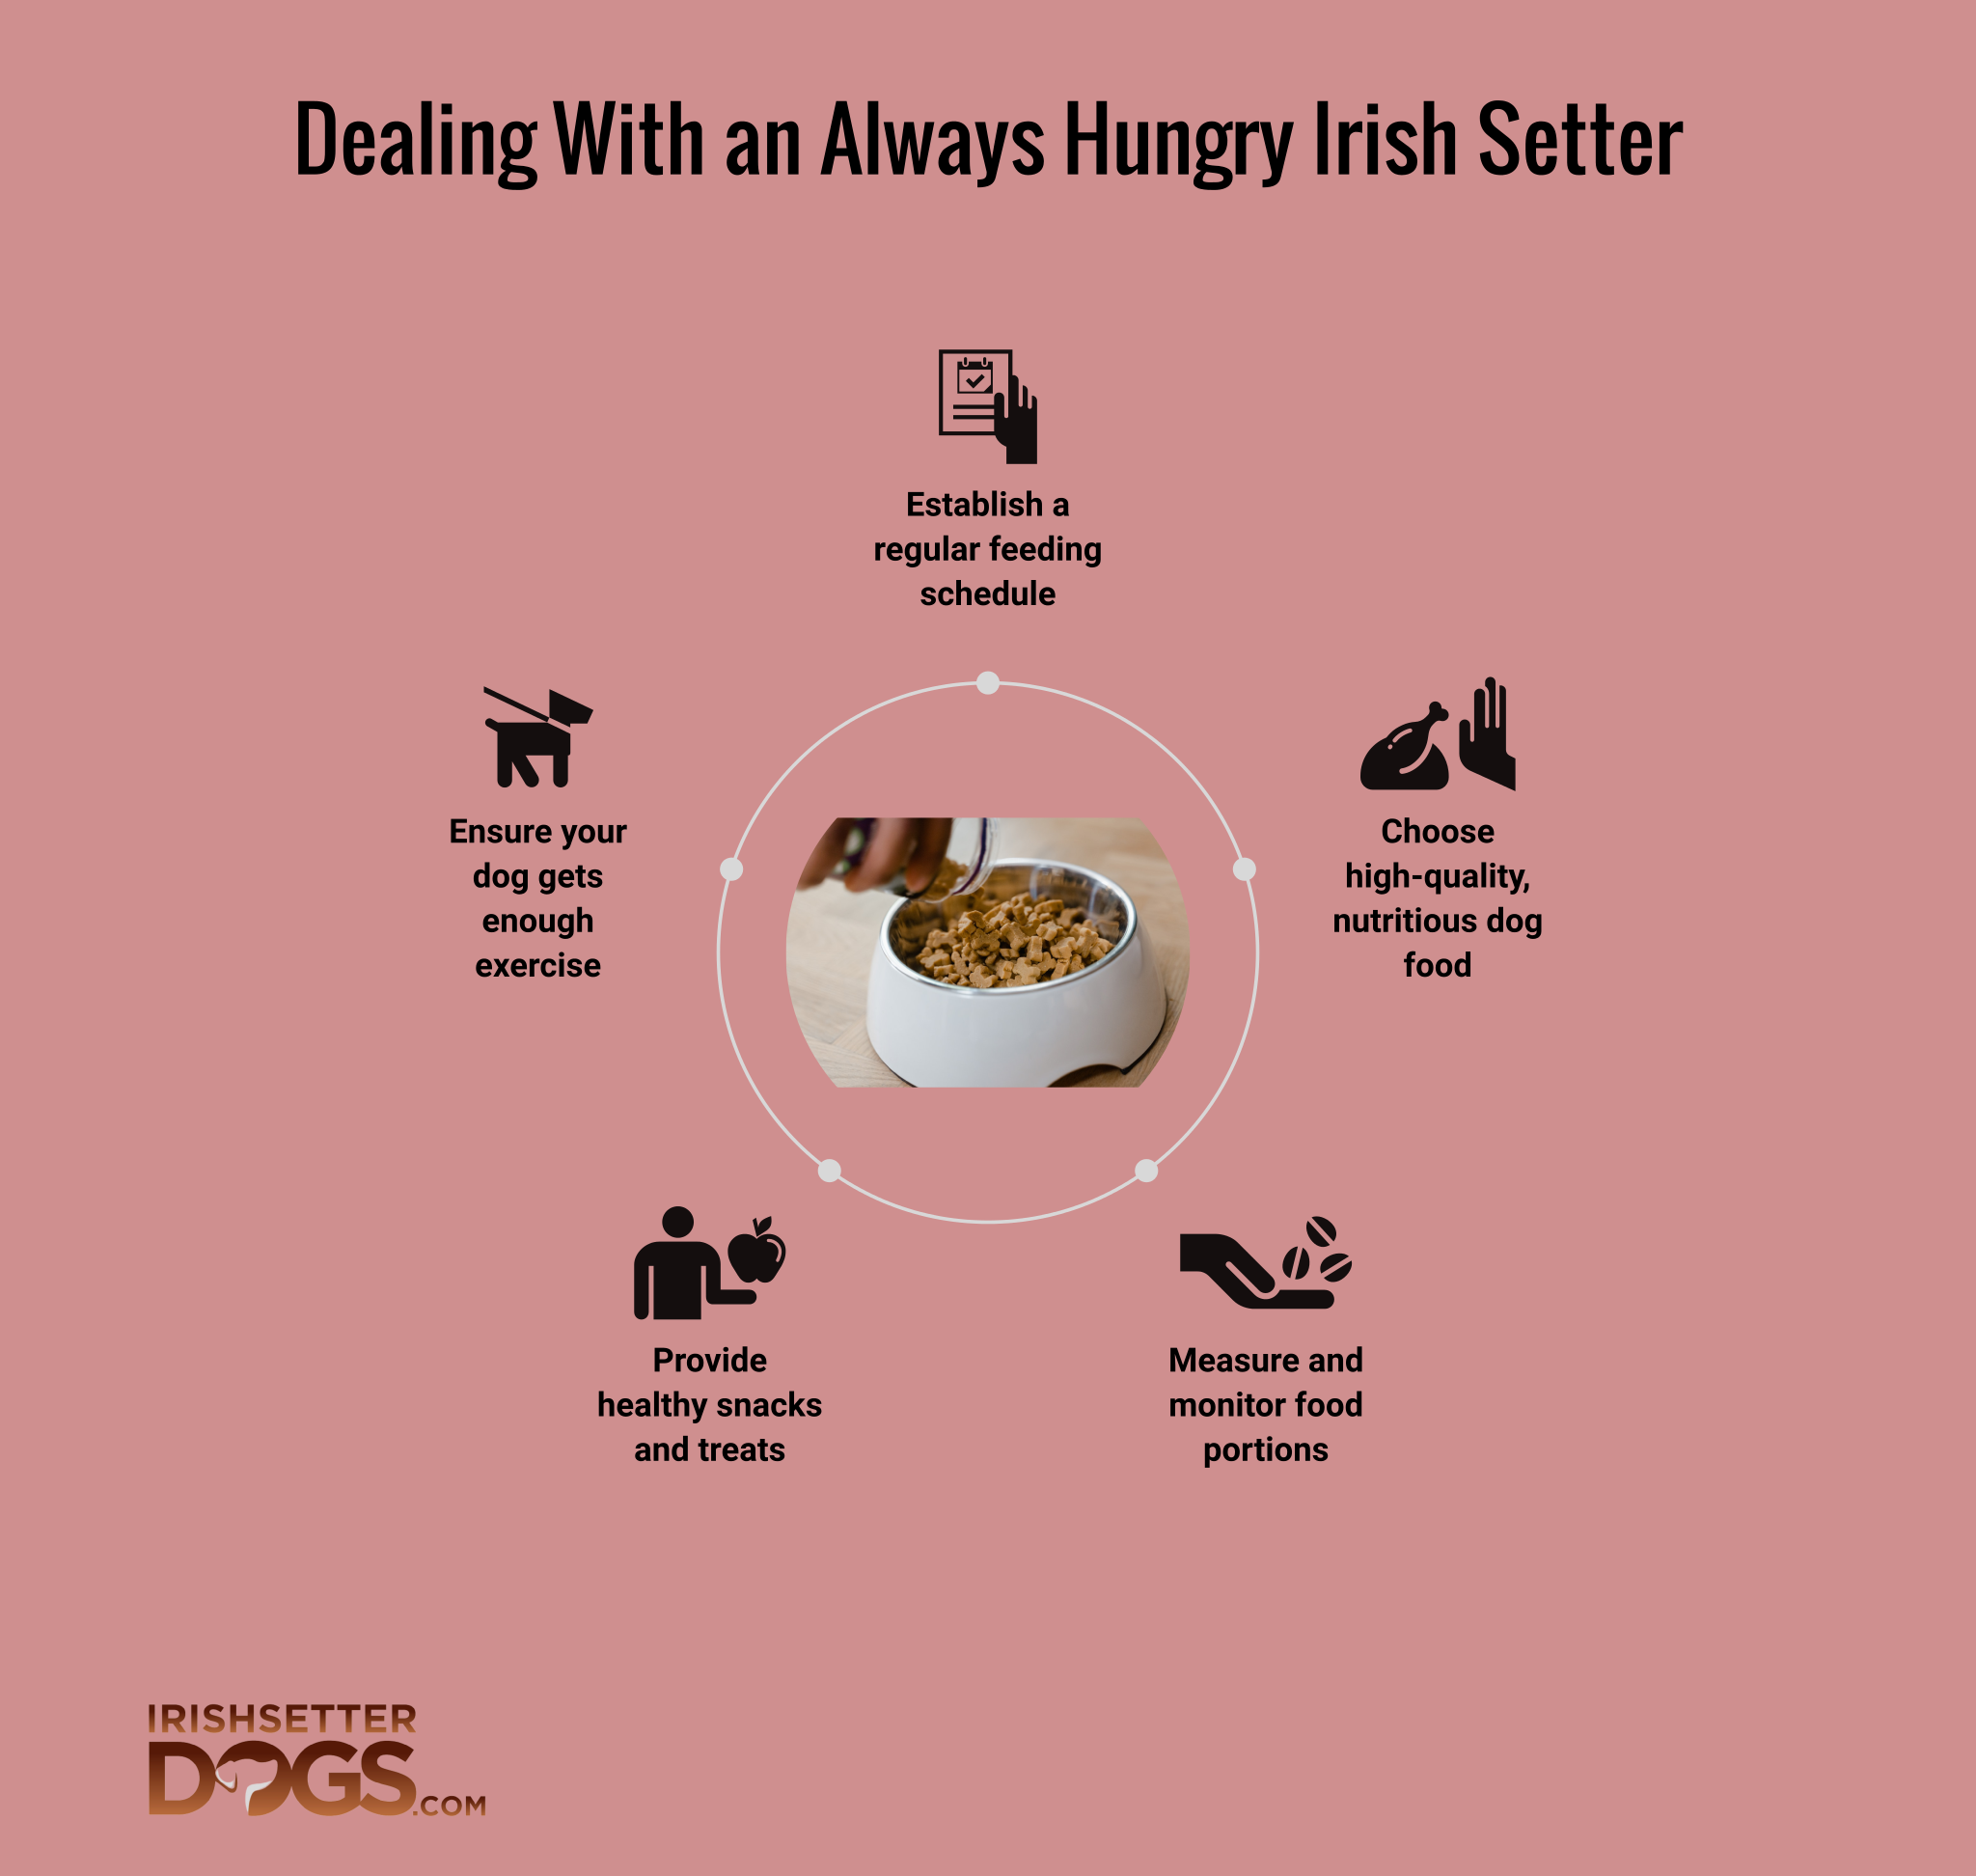 How to Deal With an Irish Setter That is Always Hungry